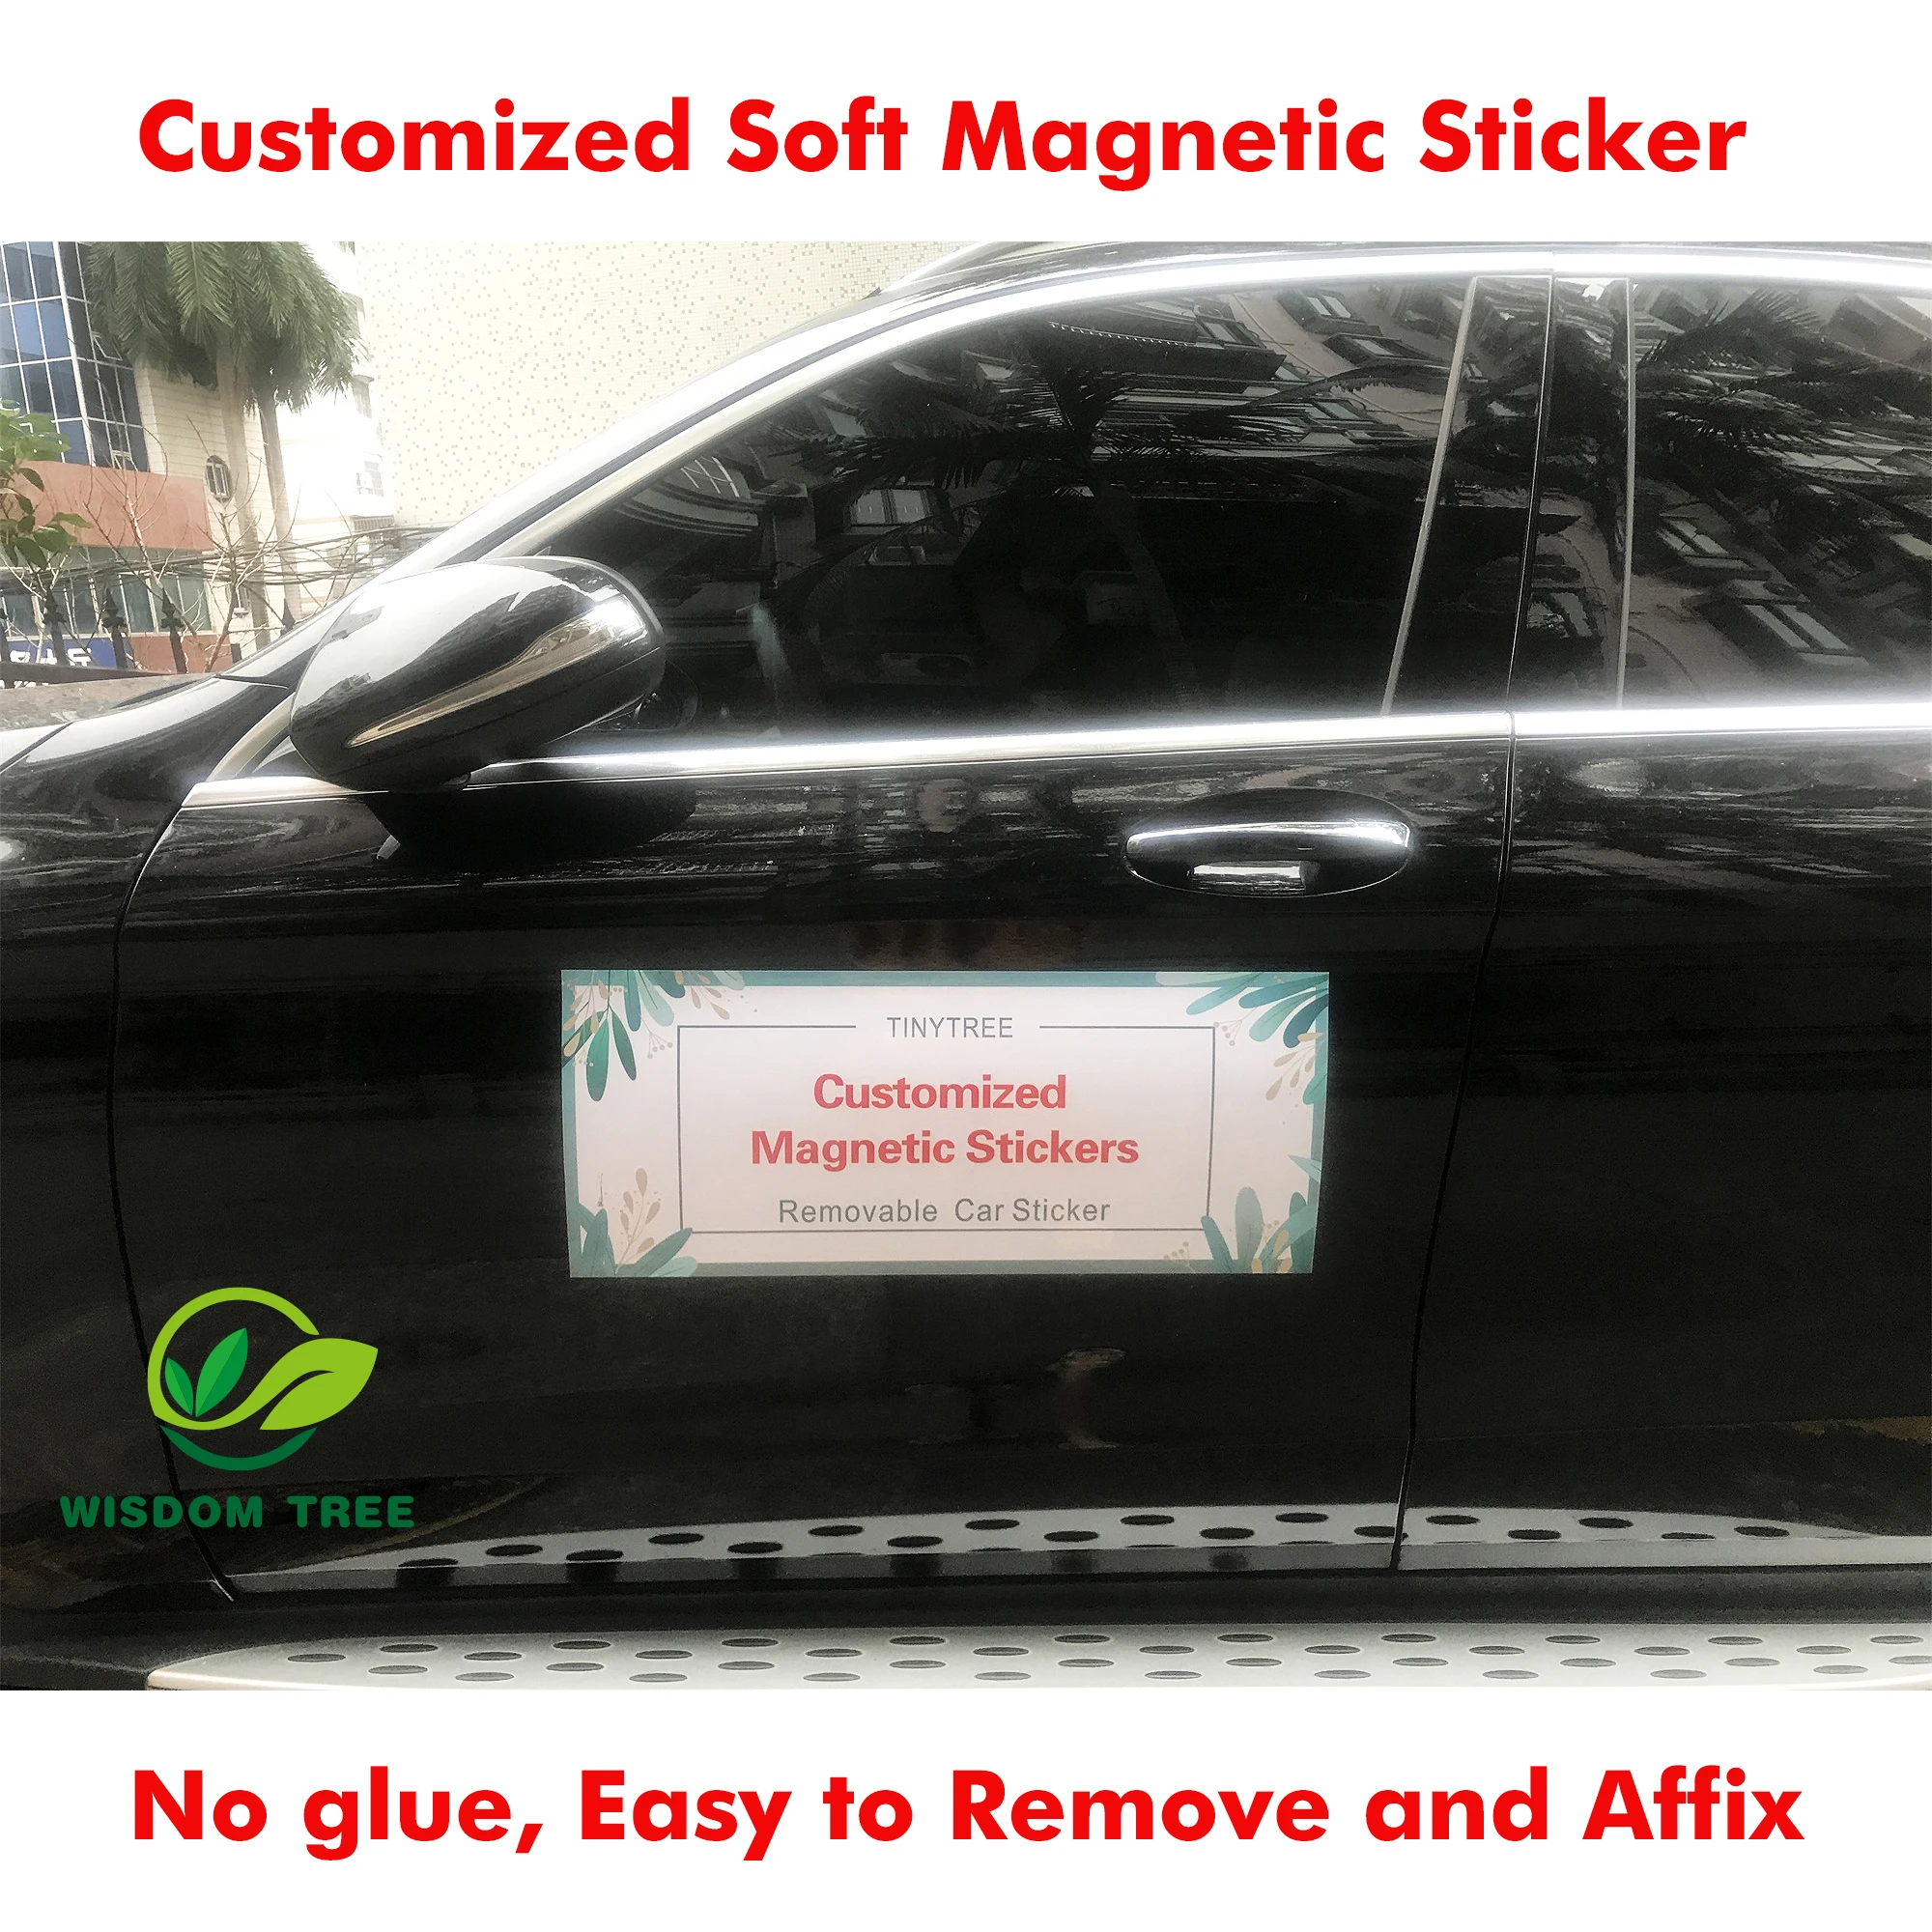 Customized Magnetic Stickers, Adhesive Car Stickers, Printed Advertising  Text Logo, Soft Magneticmagnet Magnet Sticker - Car Stickers - AliExpress